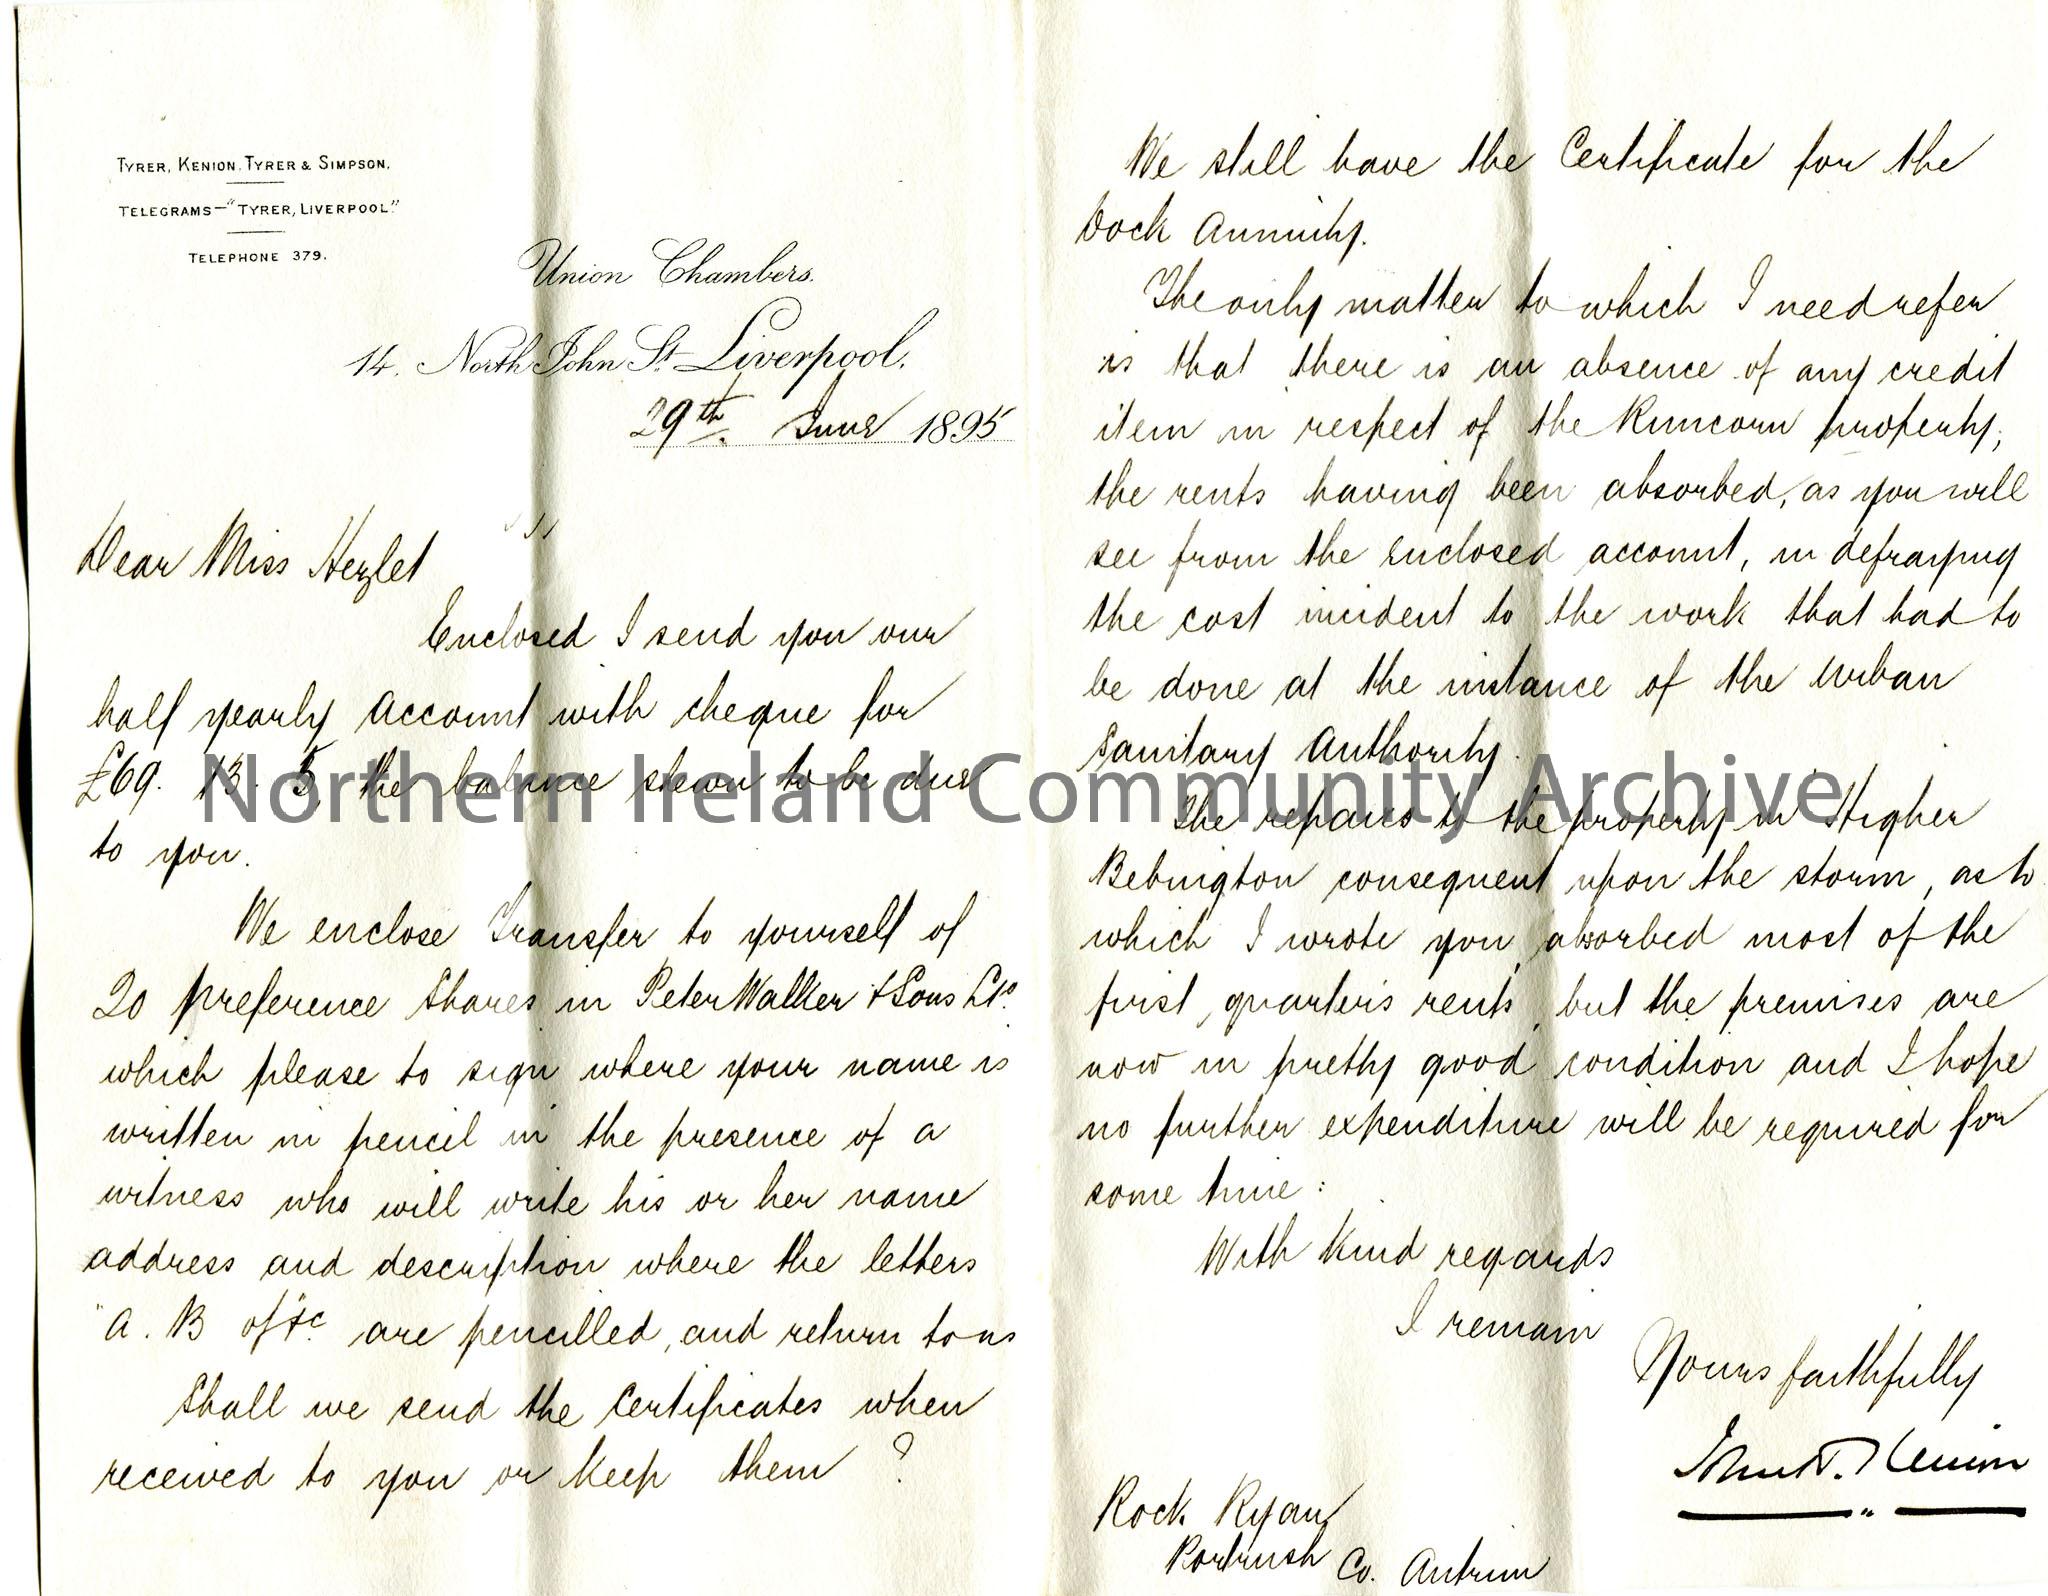 Handwritten letter to Miss Hezlet at Rockryan, Portrush, Ireland. Enclosed half yearly account statement and cheque for £69.13.5. Asks Miss Hezle…